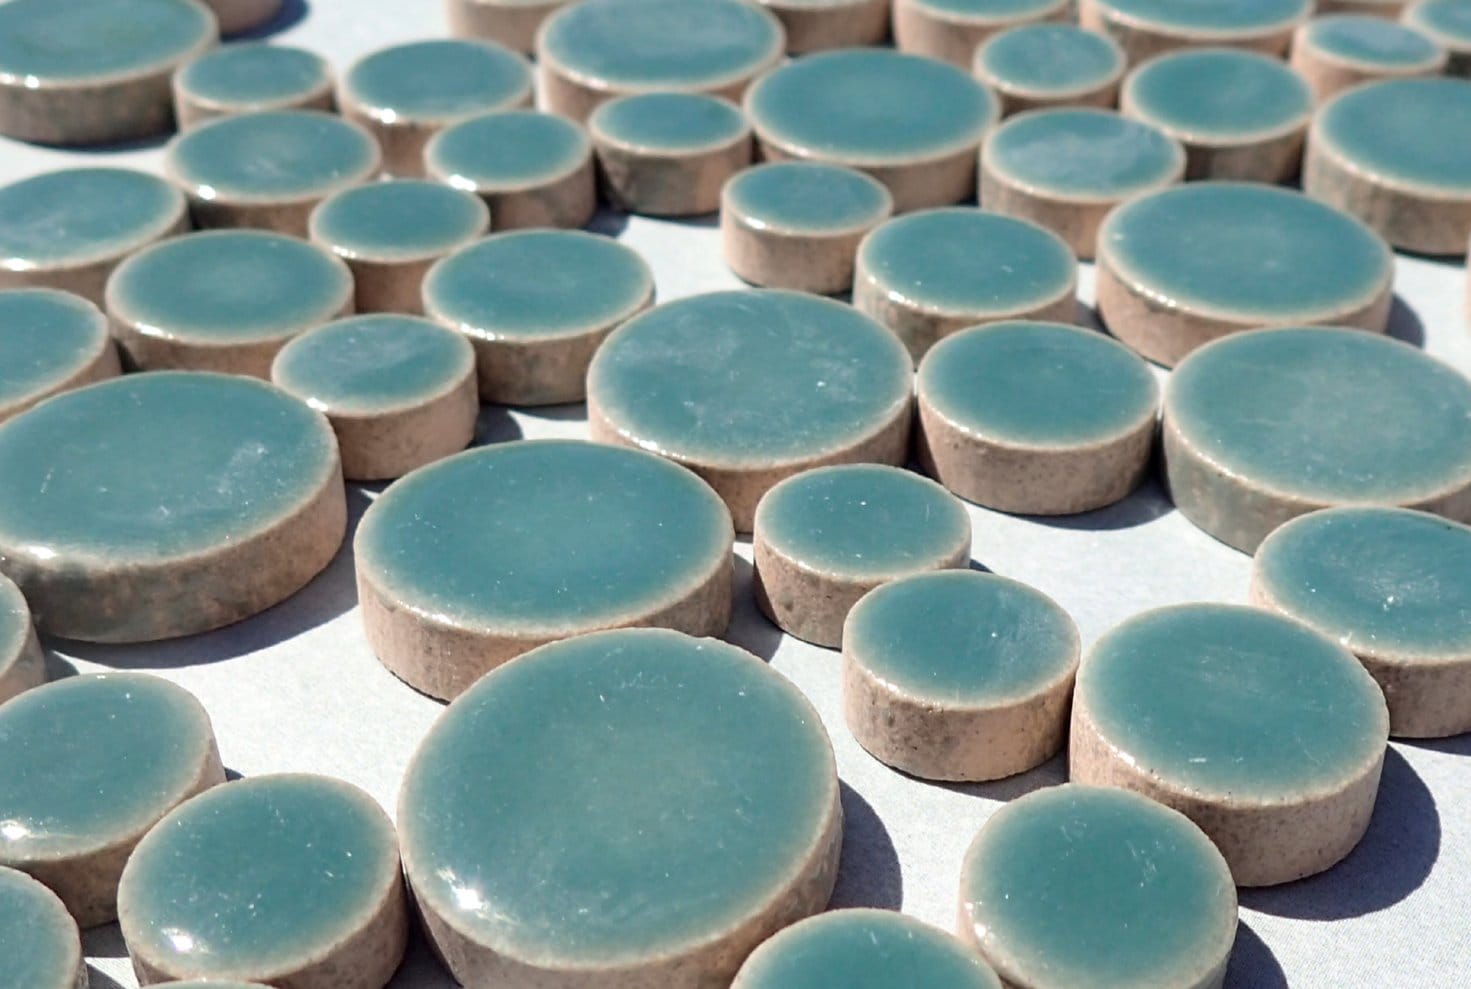 Deep Sea Green Circles Mosaic Tiles - 50g Ceramic in Mix of 3 Sizes 1/2" and 3/4" and 5/8" in Phthalo Green